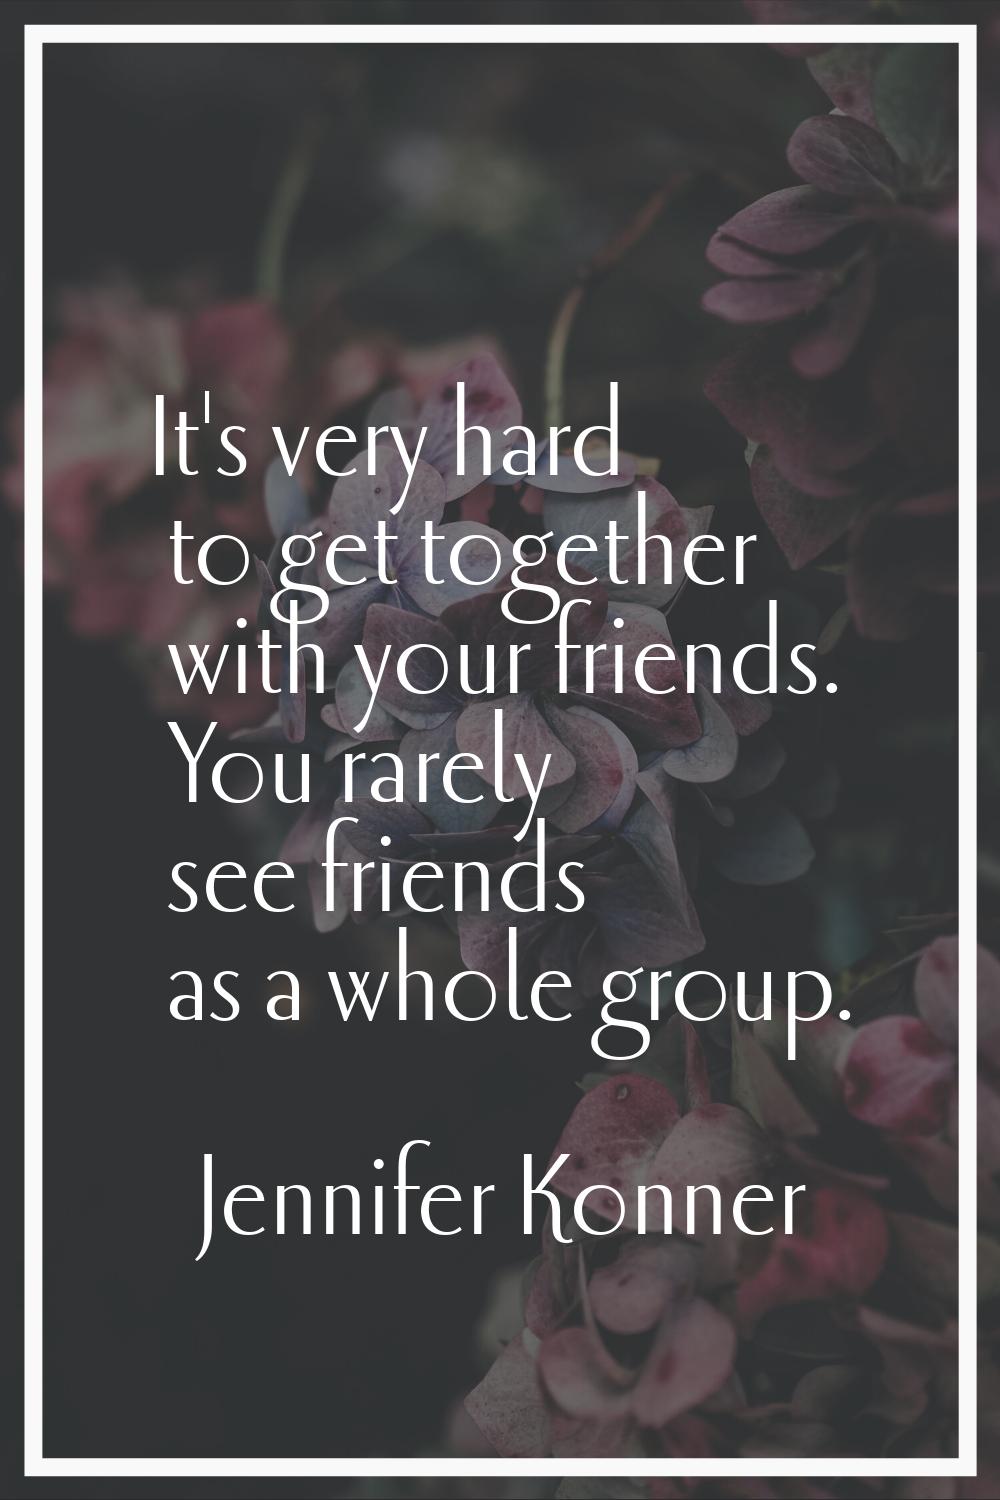 It's very hard to get together with your friends. You rarely see friends as a whole group.